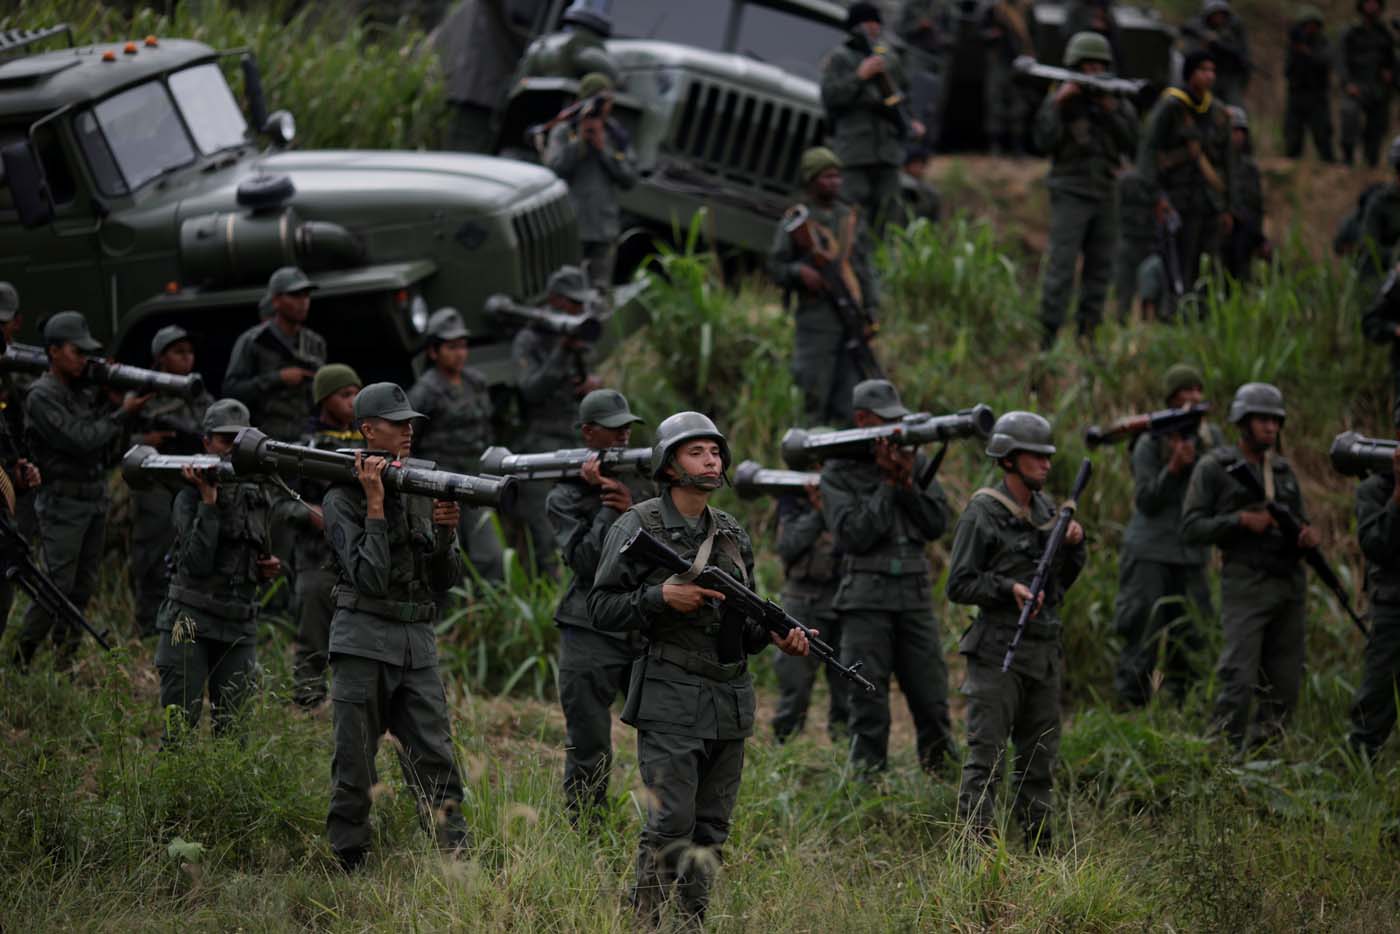 Members of the National Bolivarian Armed Forces attend a news conference by Admiral-in-Chief Remigio Ceballos, Strategic Operational Commander of the Bolivarian National Armed Forces, during military exercises at Fuerte Tiuna Military Base in Caracas, Venezuela August 25, 2017. REUTERS/Marco Bello